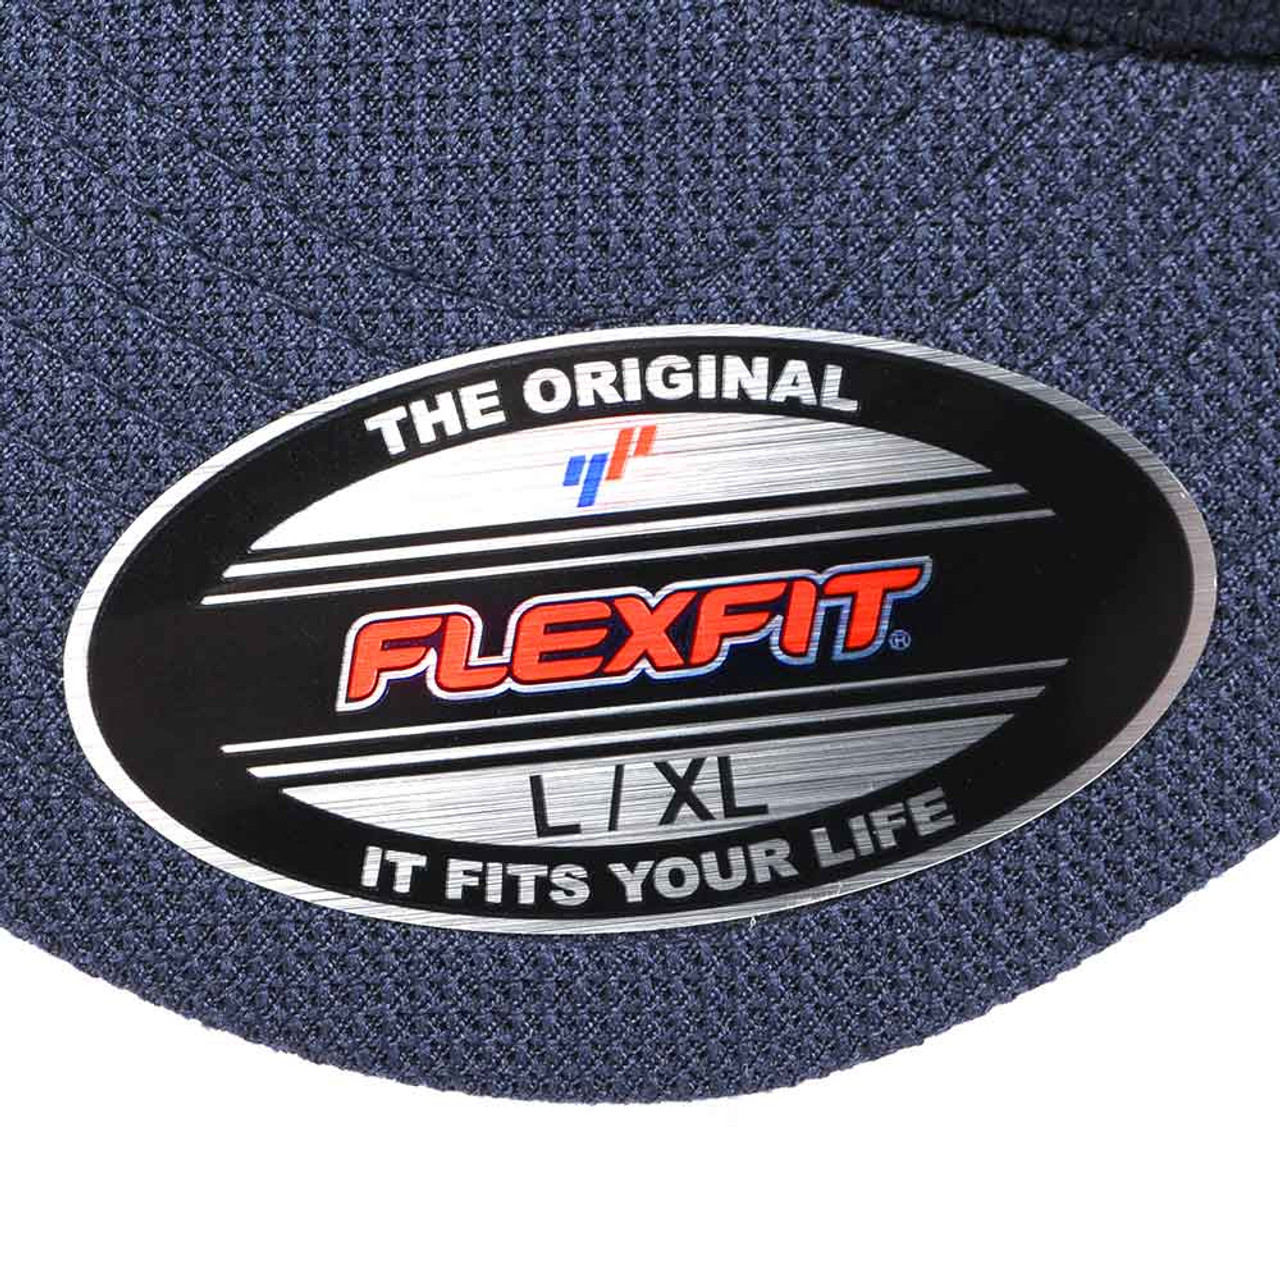 6577CD FLEXFIT - Grace Collection - Headwear, Bags and Clothing.